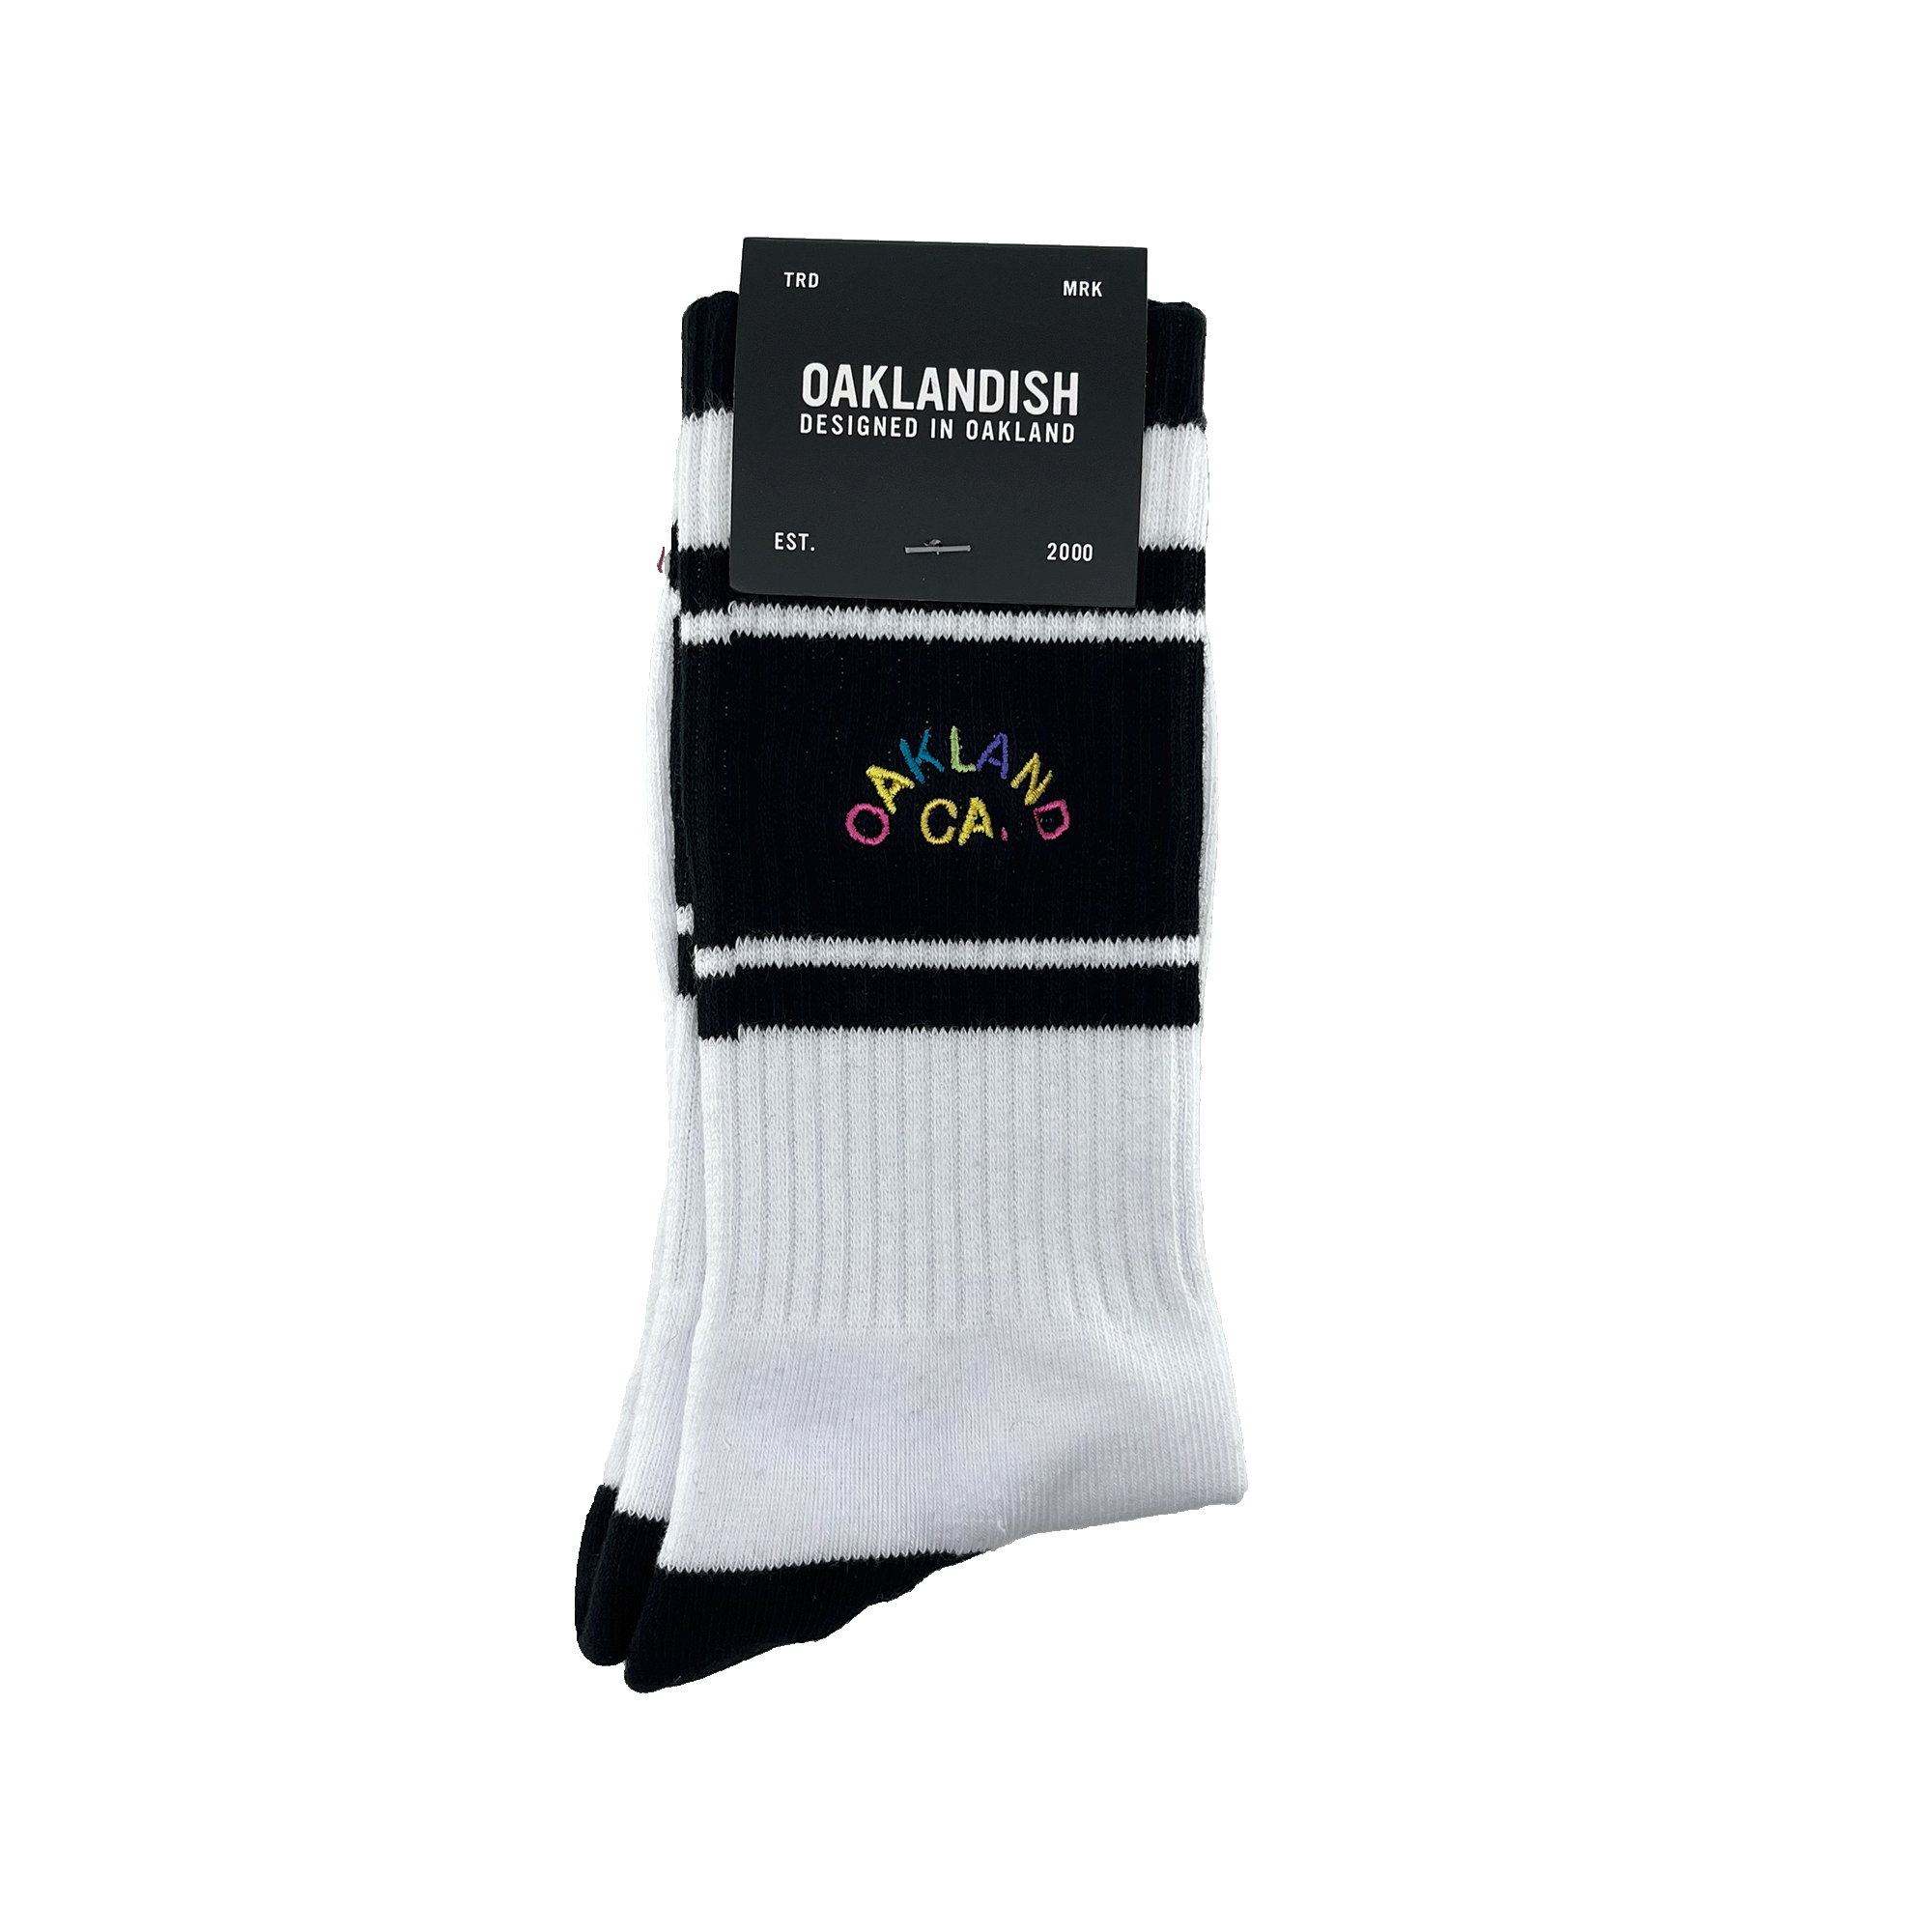 Pair of folded black and white crew socks in Oaklandish packaging with  full-color OAKLAND CALIFORNIA wordmark on the sock.